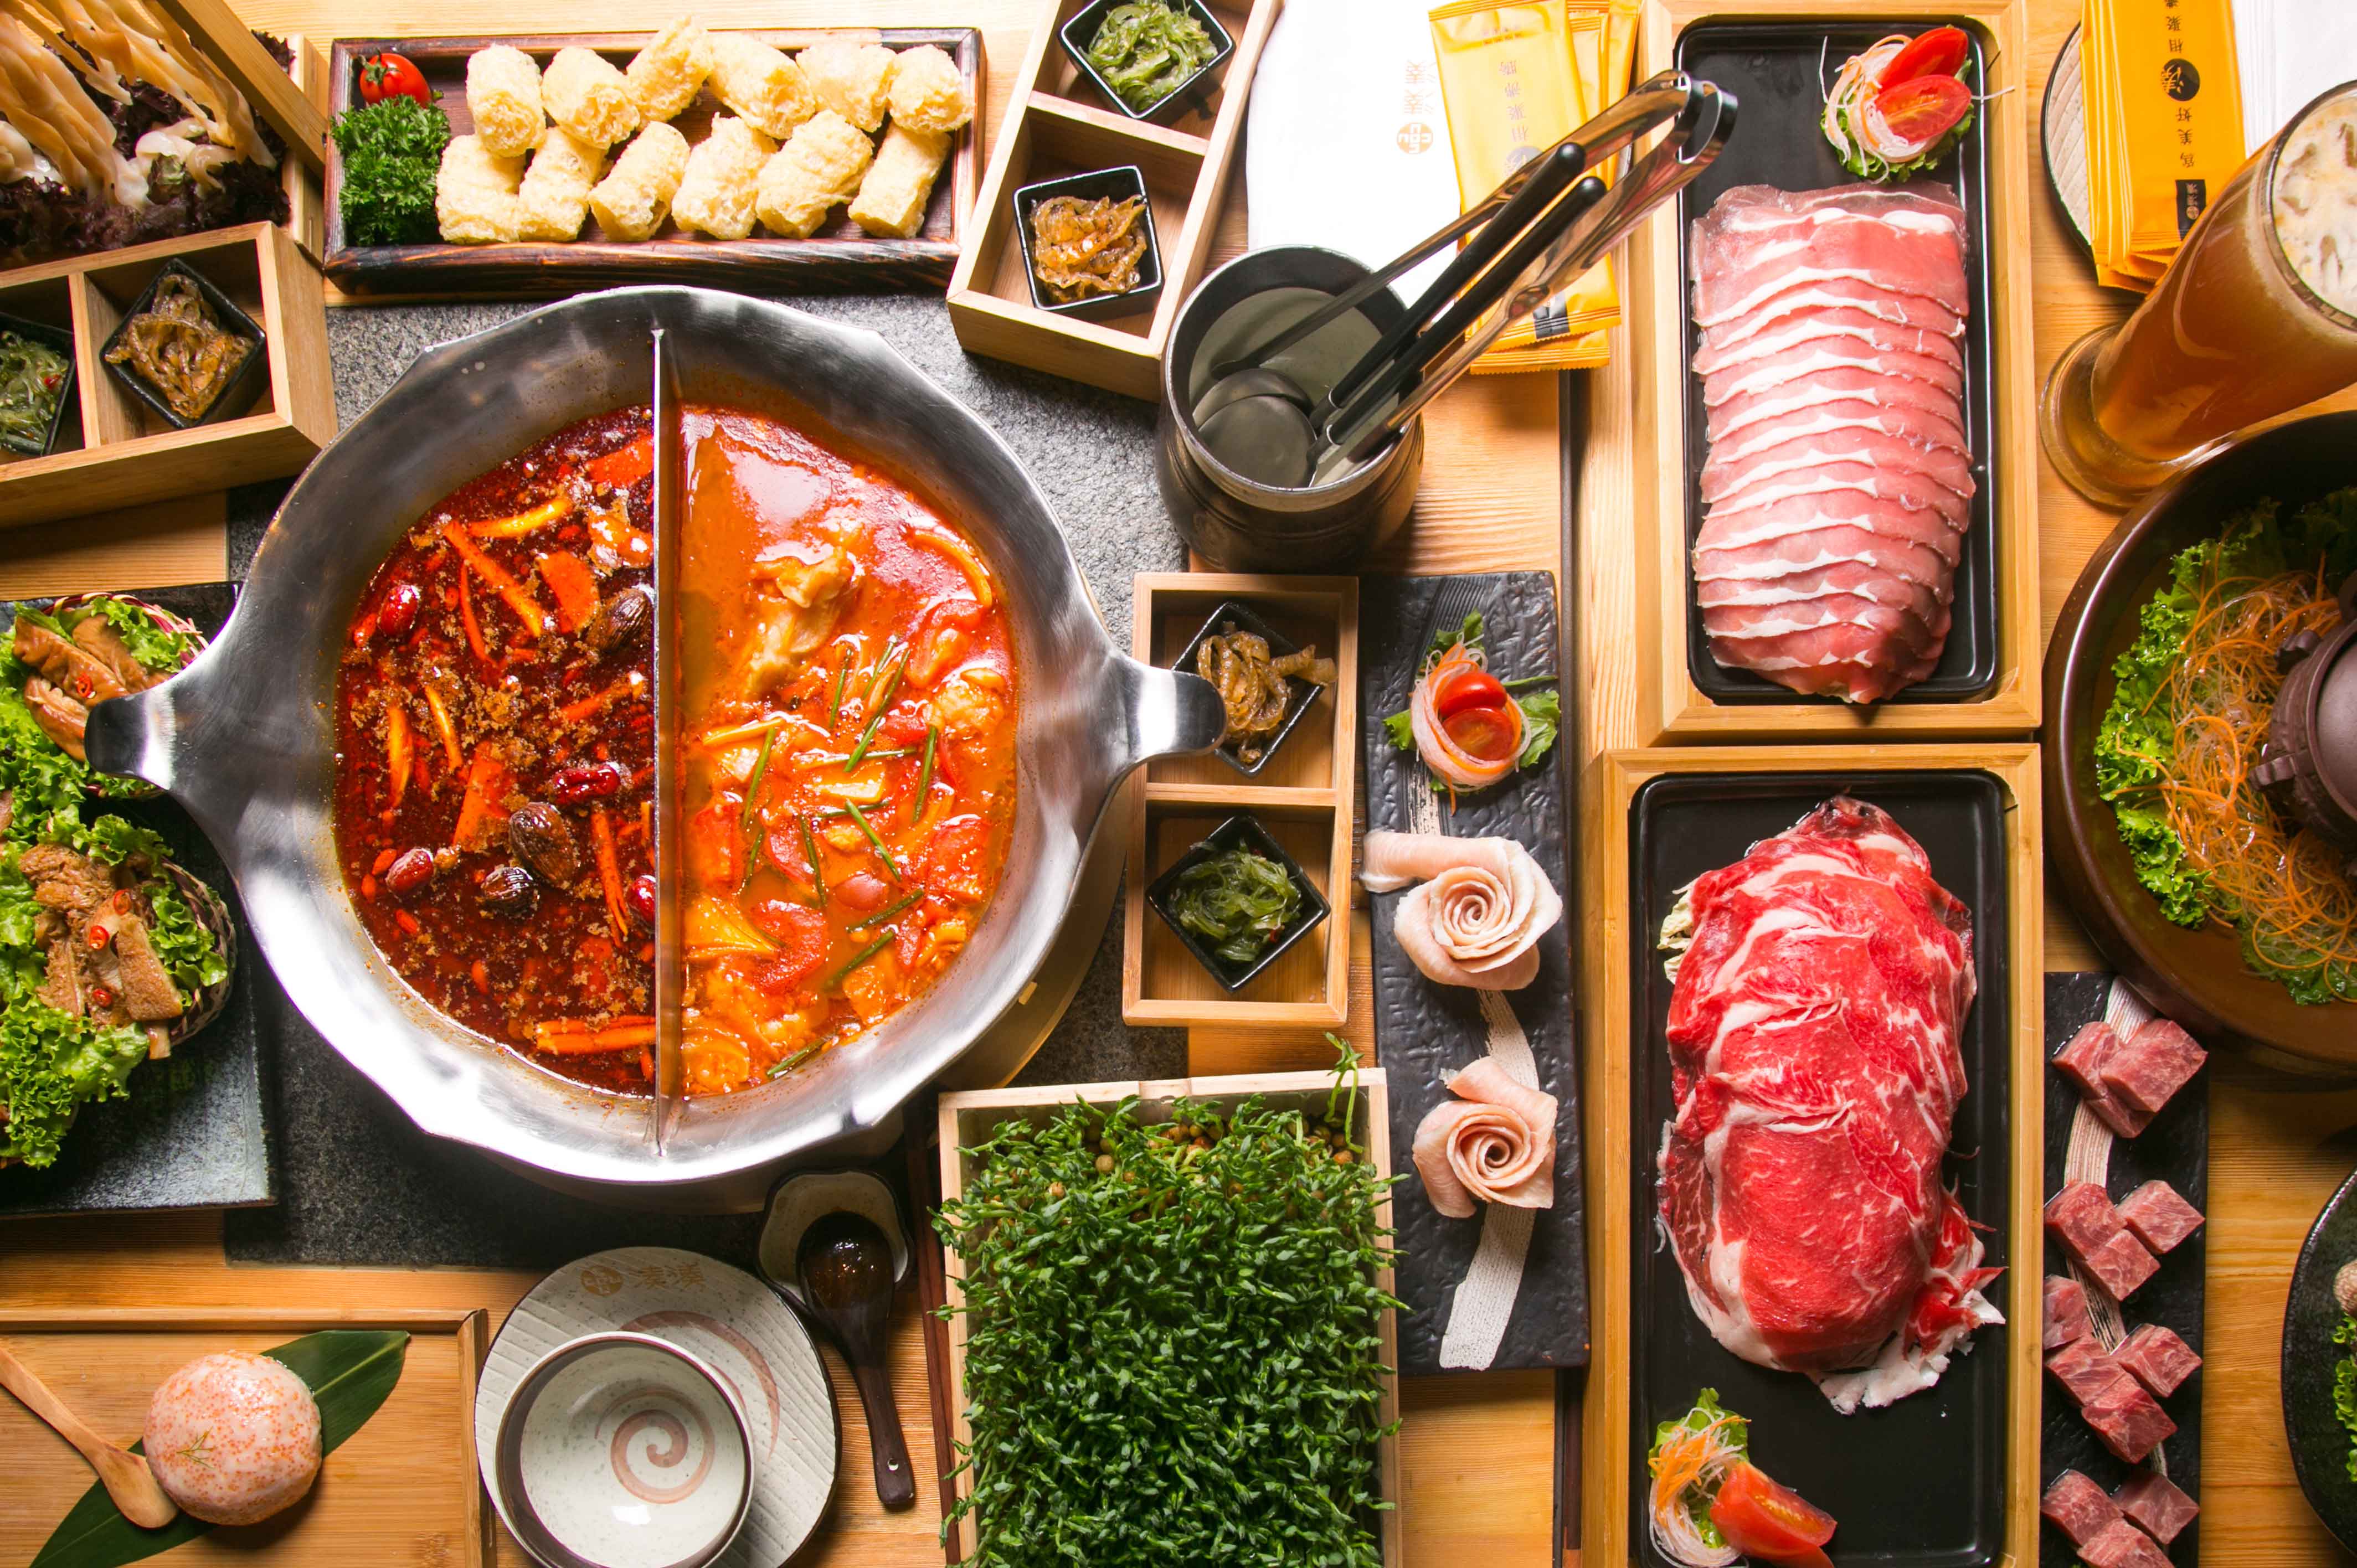 Chengdu Hot Pot - the Dragon's Treat for Visiting Tourists in Chengdu